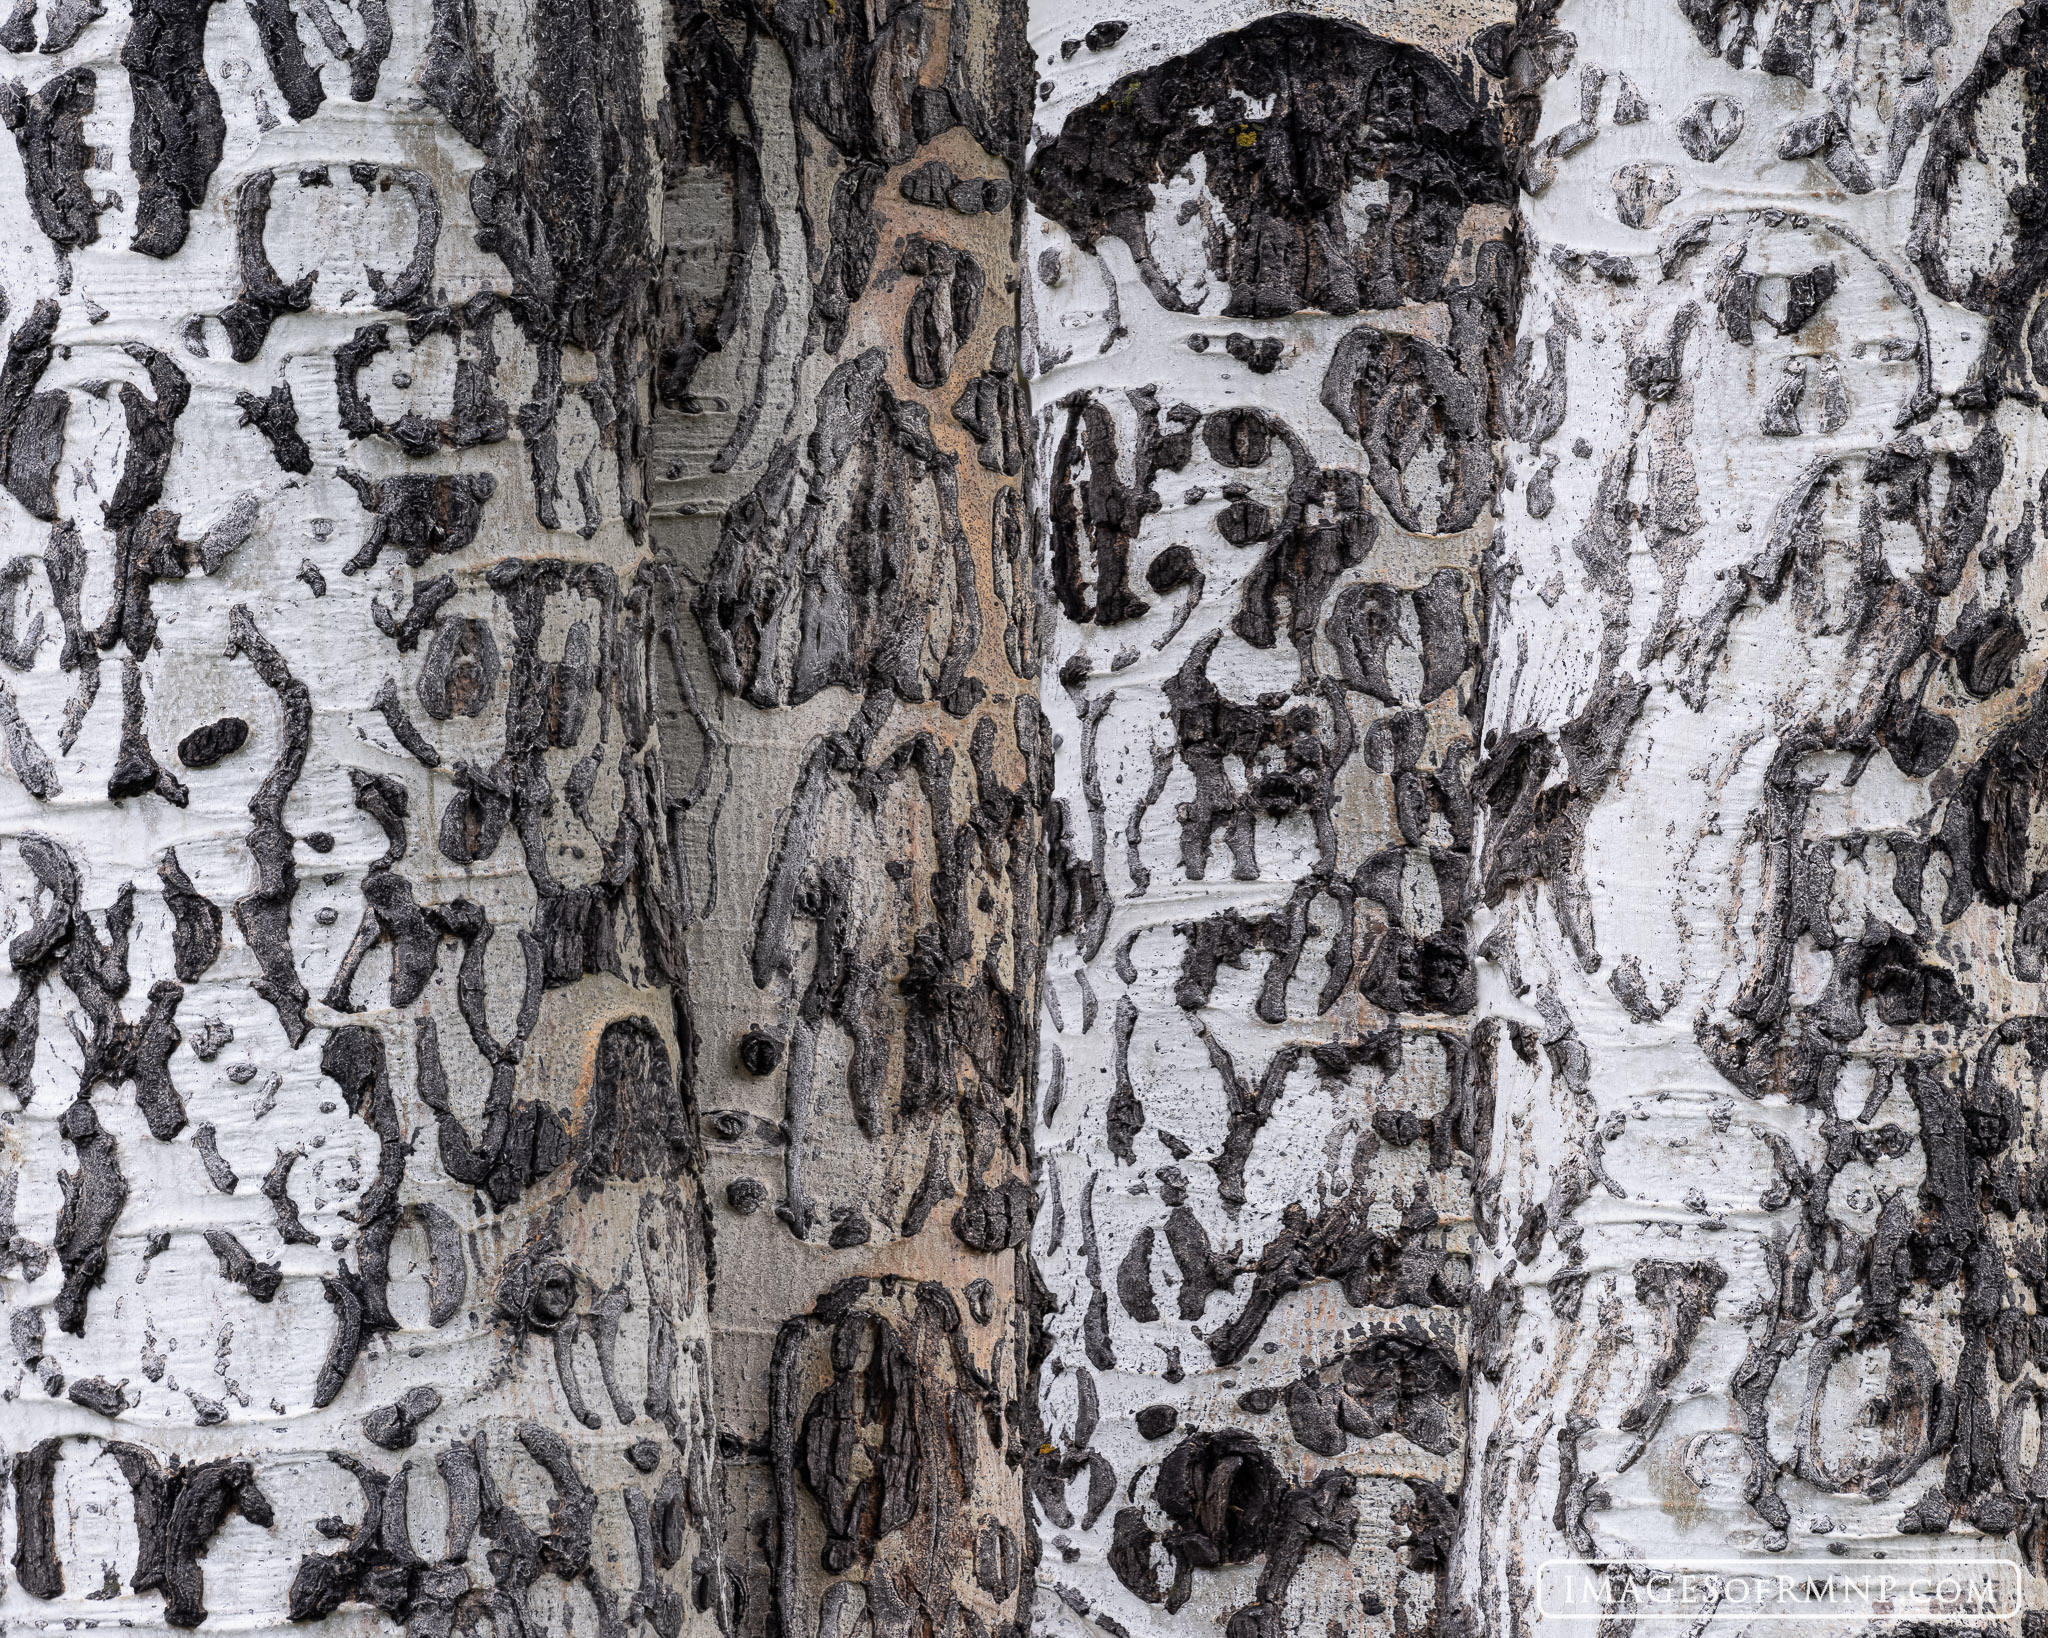 A stand of four aspen trunks show off the mezmerizing texture of their bark, both confusing and delighting the viewer.